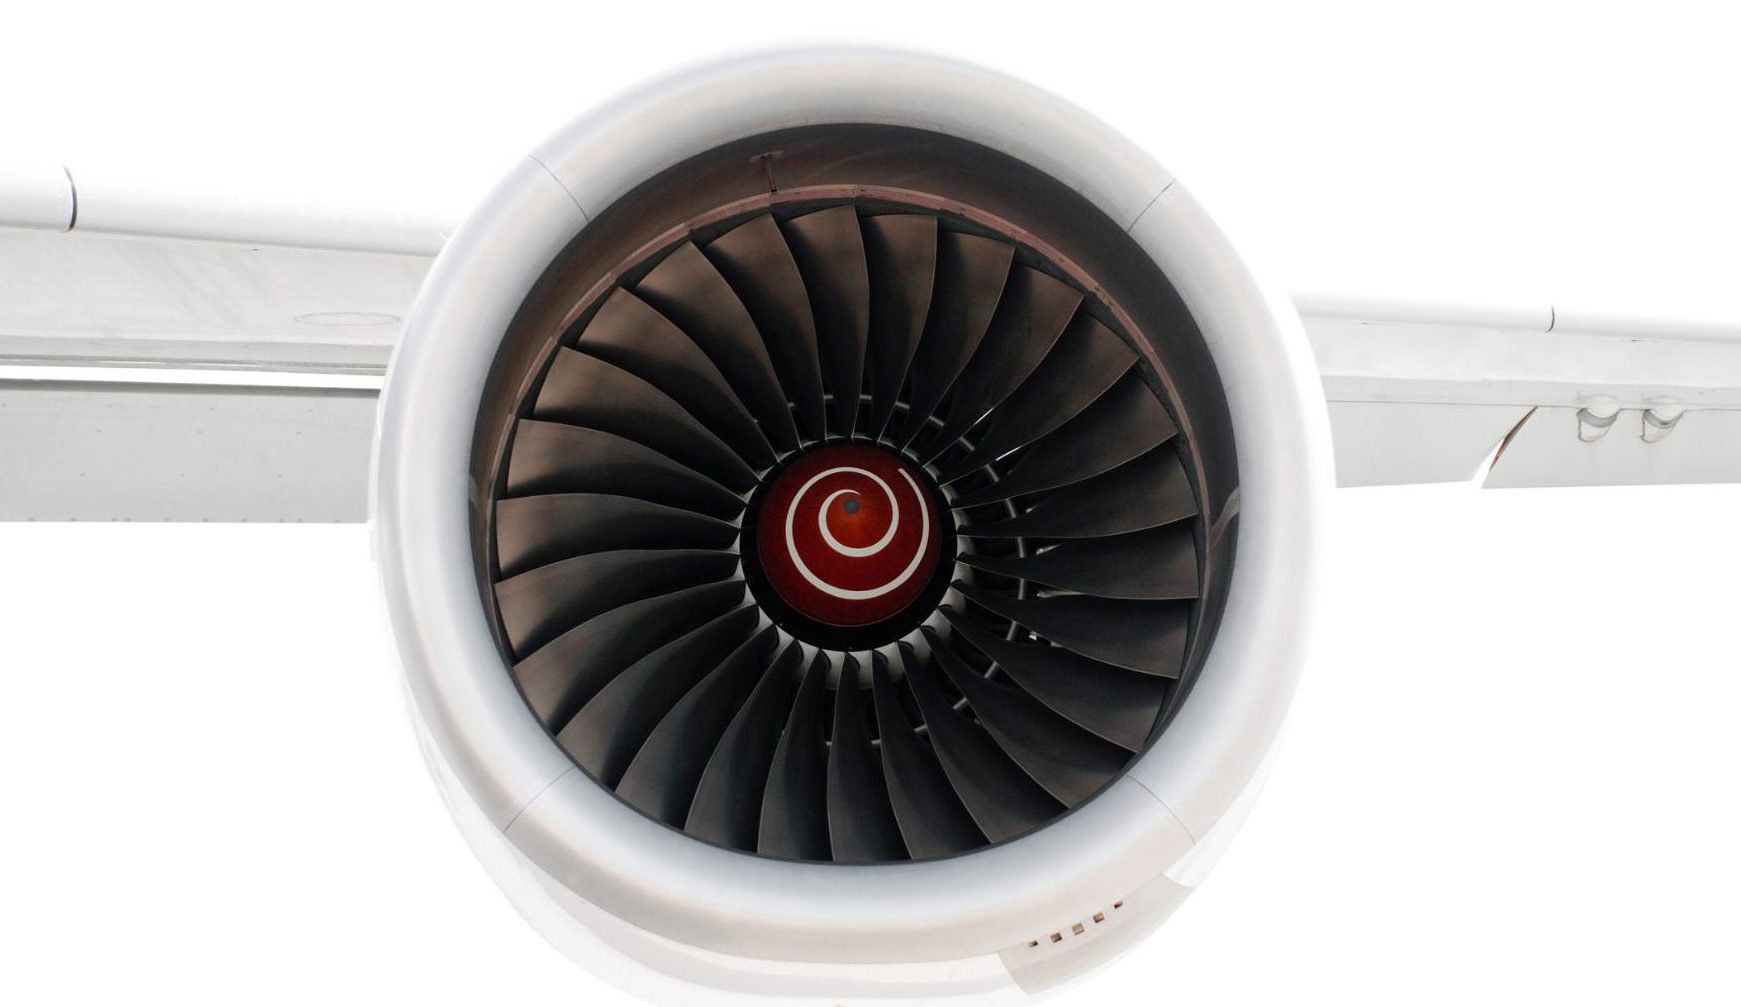 Take Up Global Aeroengine Composites Market Opportunities with Clear Industry Data – Includes Aeroengine Composites Market Share